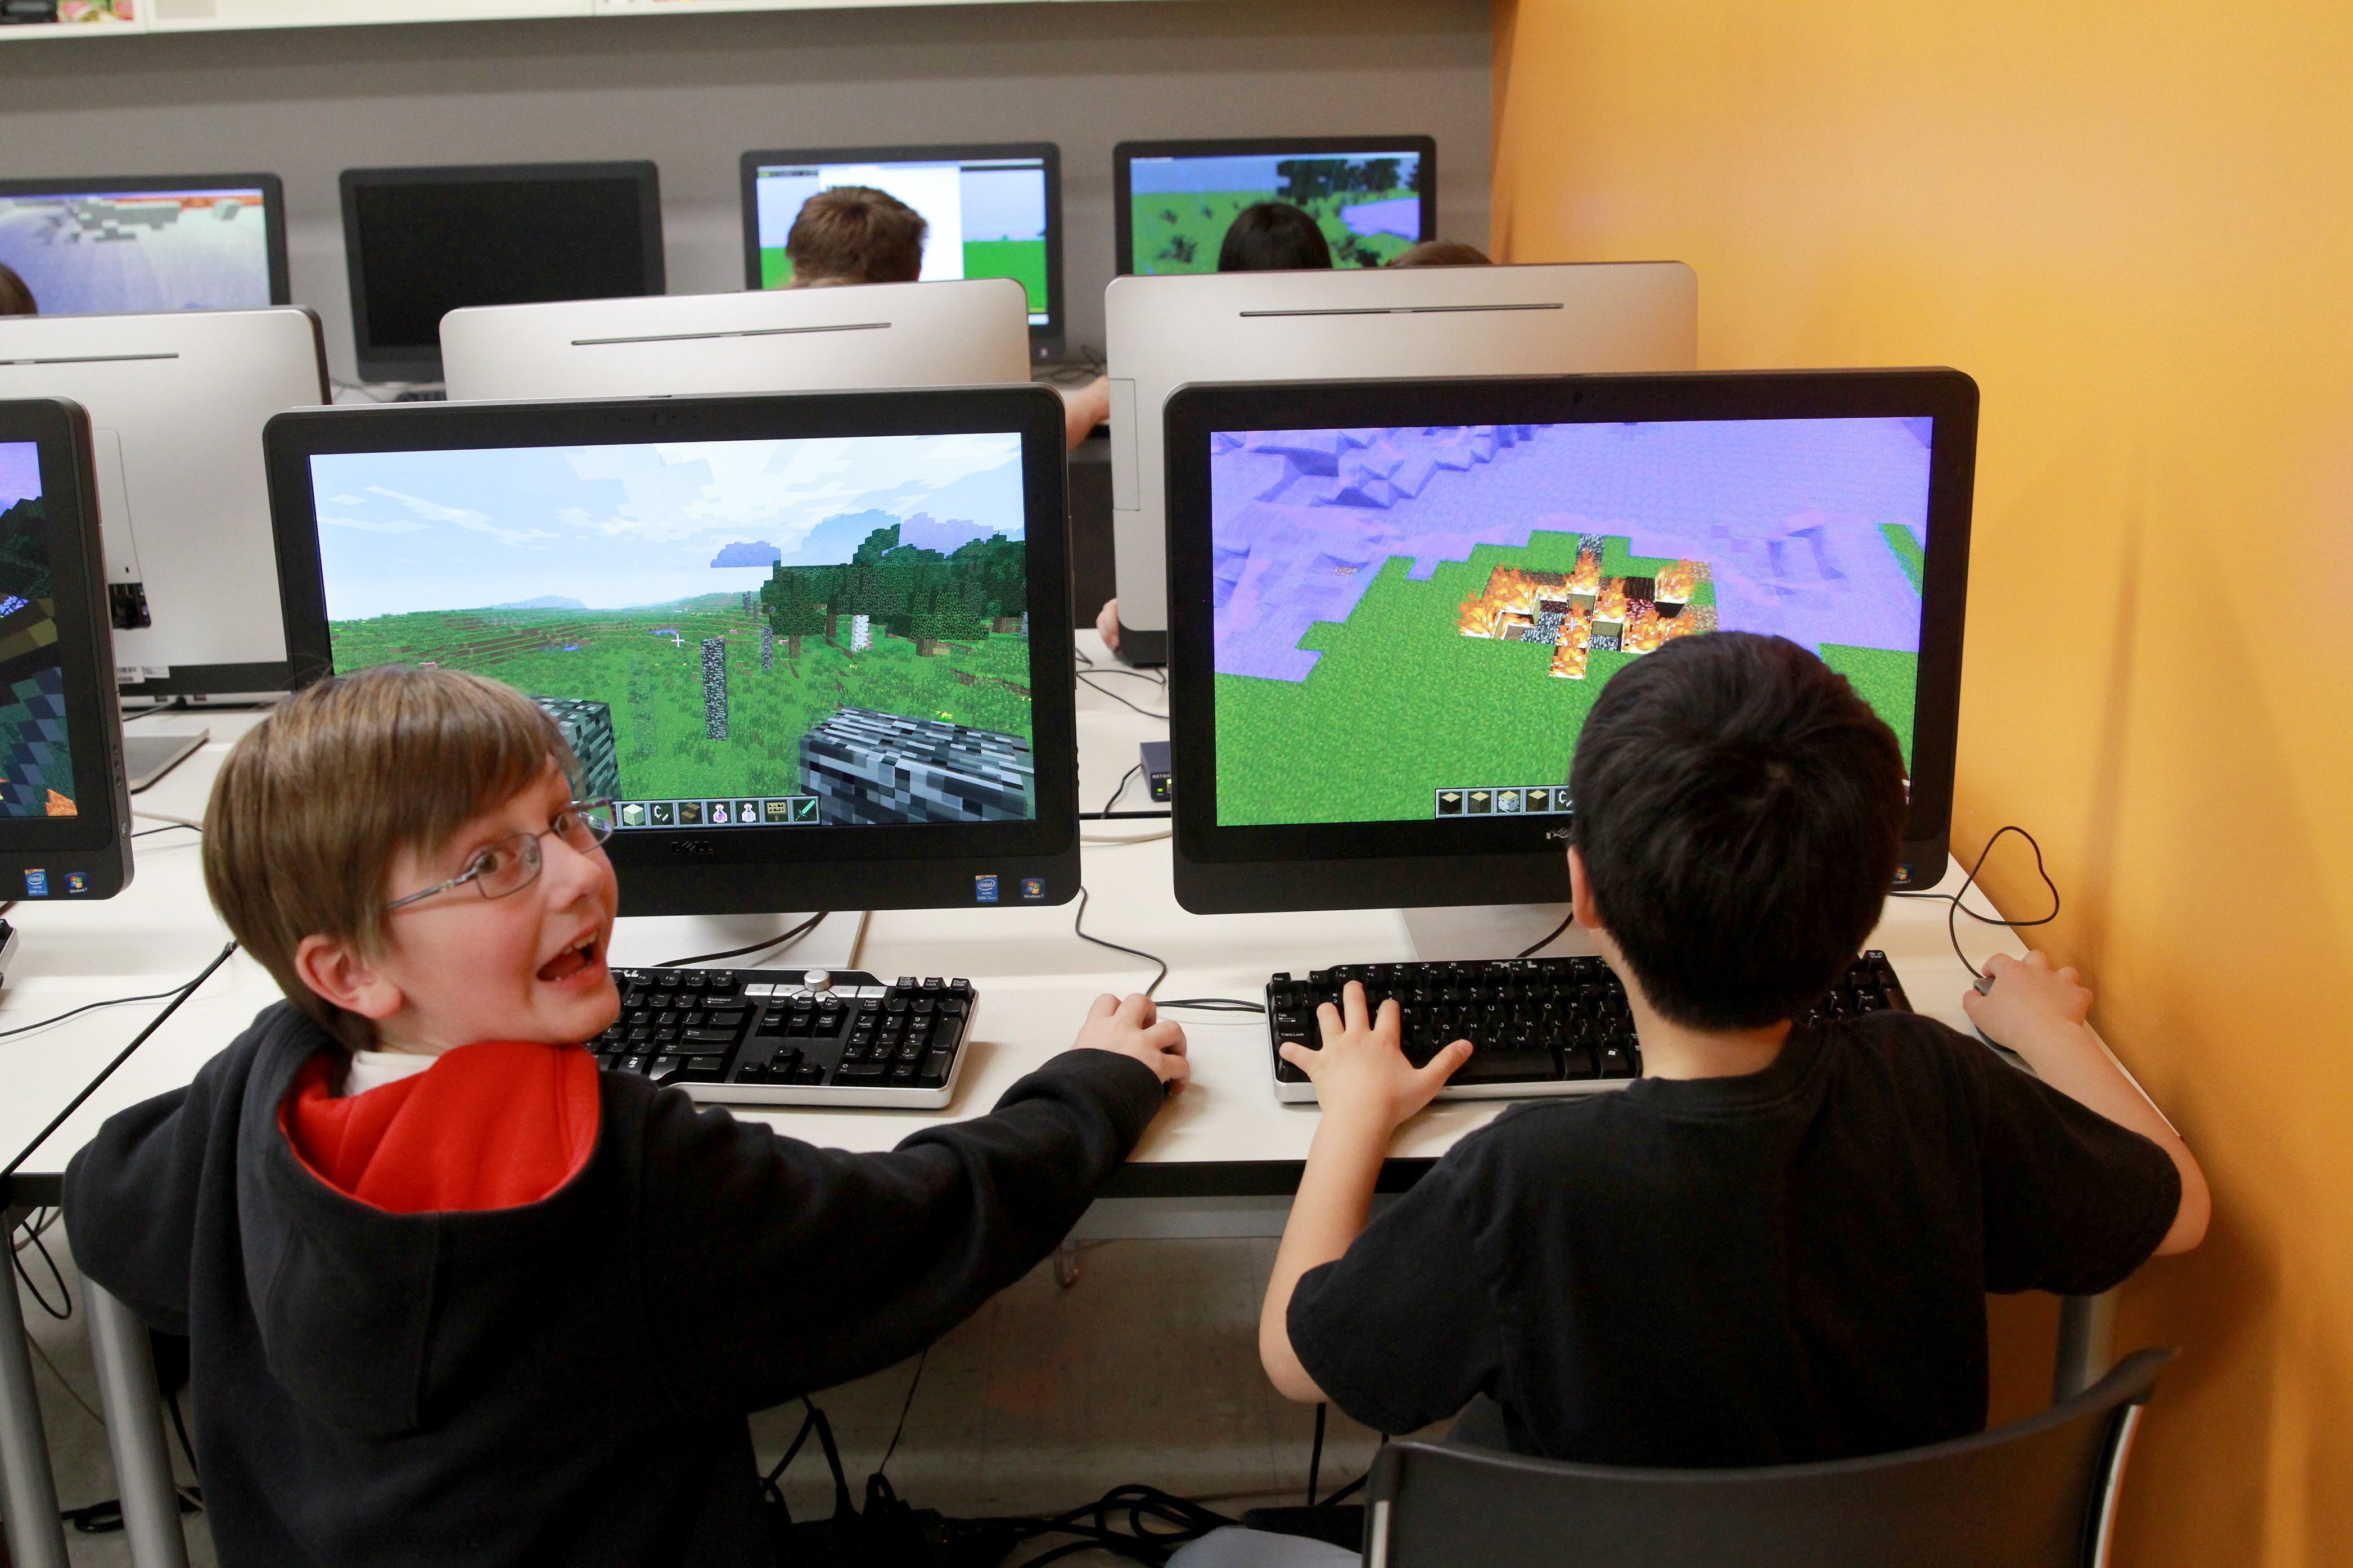 Bobby Craig, left, and Doogy Lee create worlds in Minecraft that parallel what they have bene reading in "The Hobbit" as part of their fifth grade class studies at Quest Academy in Palatine, Ill. (Chicago Tribune&mdash;MCT via Getty Images)